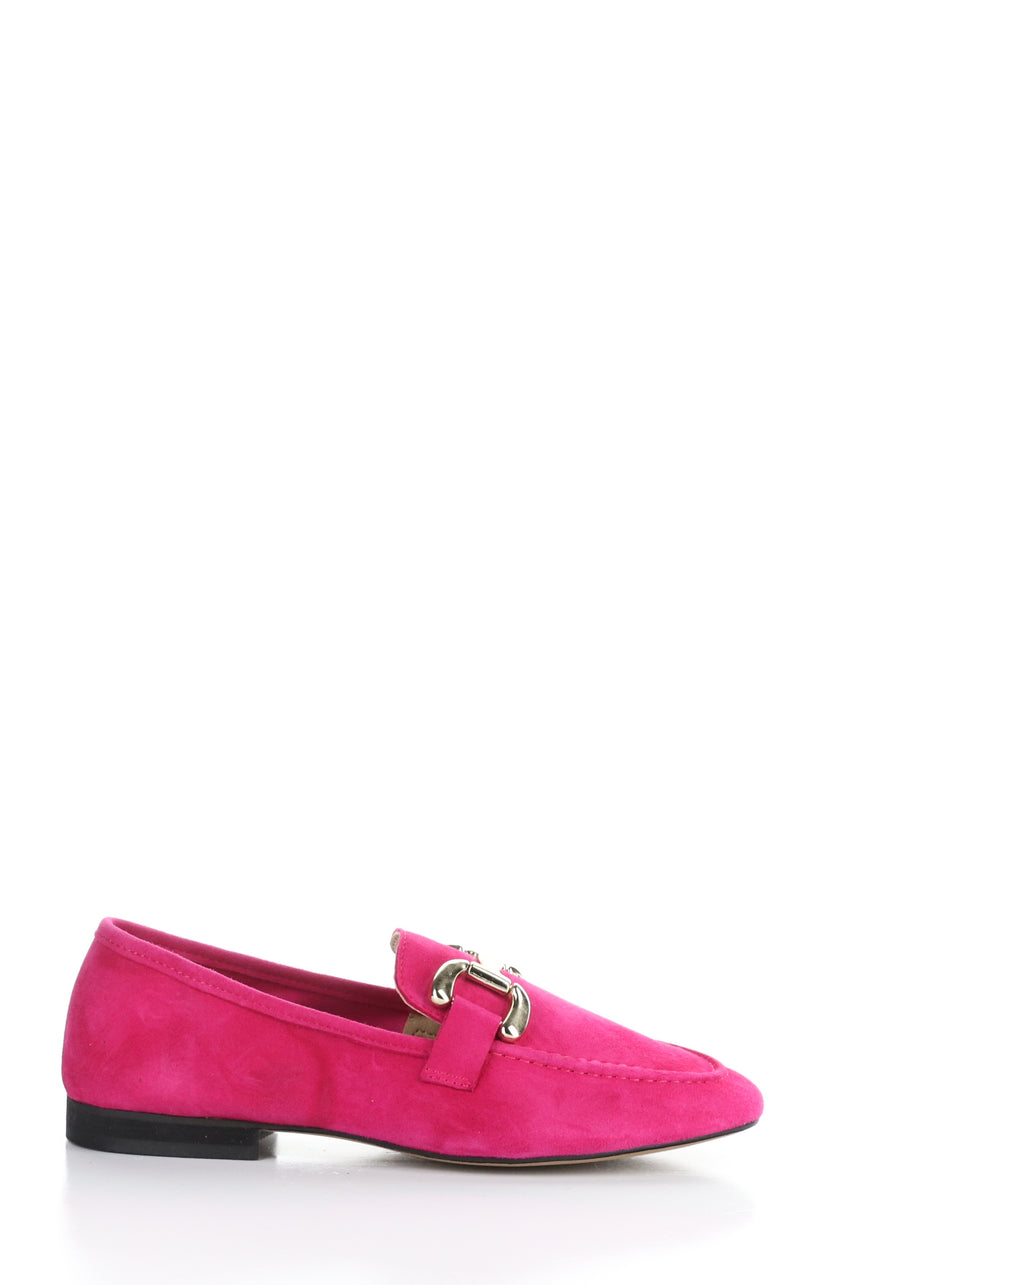 Bos &Co "Macie" Fuchsia leather loafer